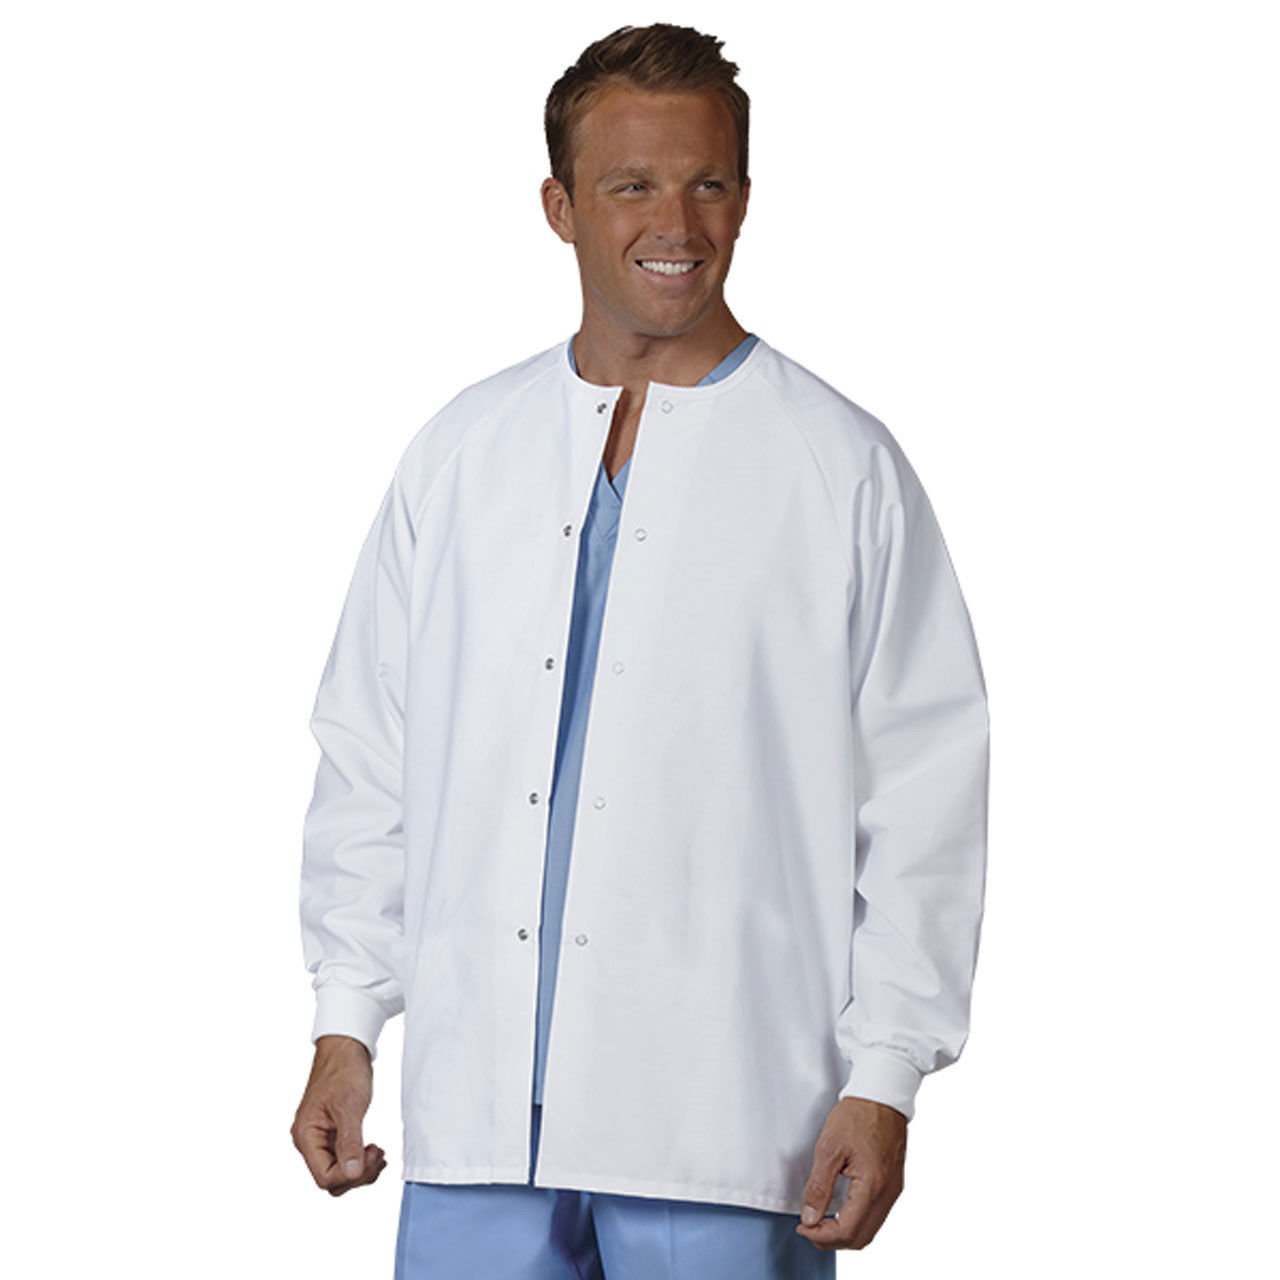 What are the common uses for this scrub warm up jacket?